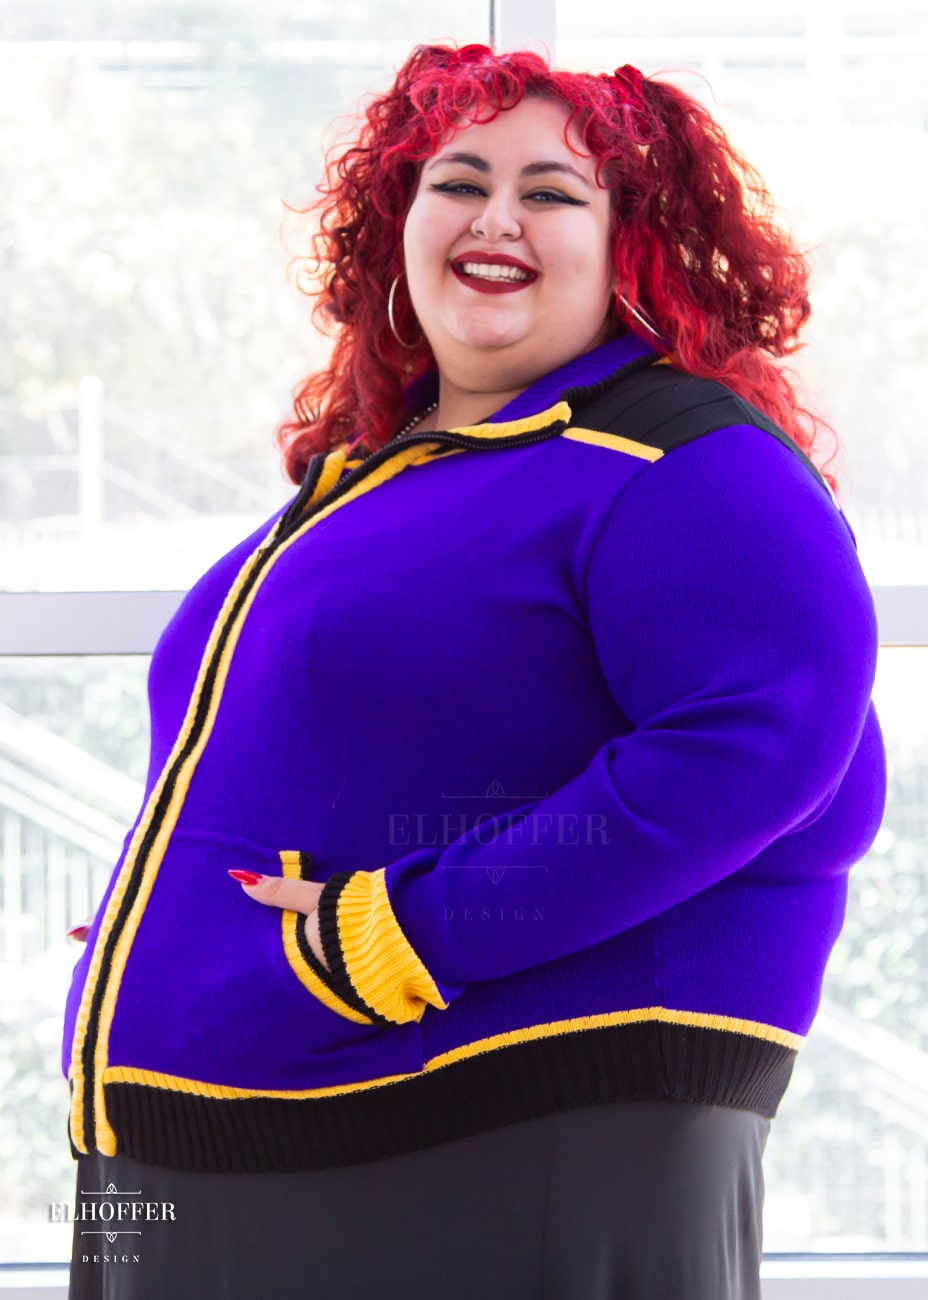 Victoria, an olive skinned 4XL model with curly bright red hair, is wearing a knit jacket featuring textured sleeves, ribbed kangaroo pockets, a hidden front zipper, and a gorgeous high neckline. The main body of the sweater is bright purple, with black and yellow details.